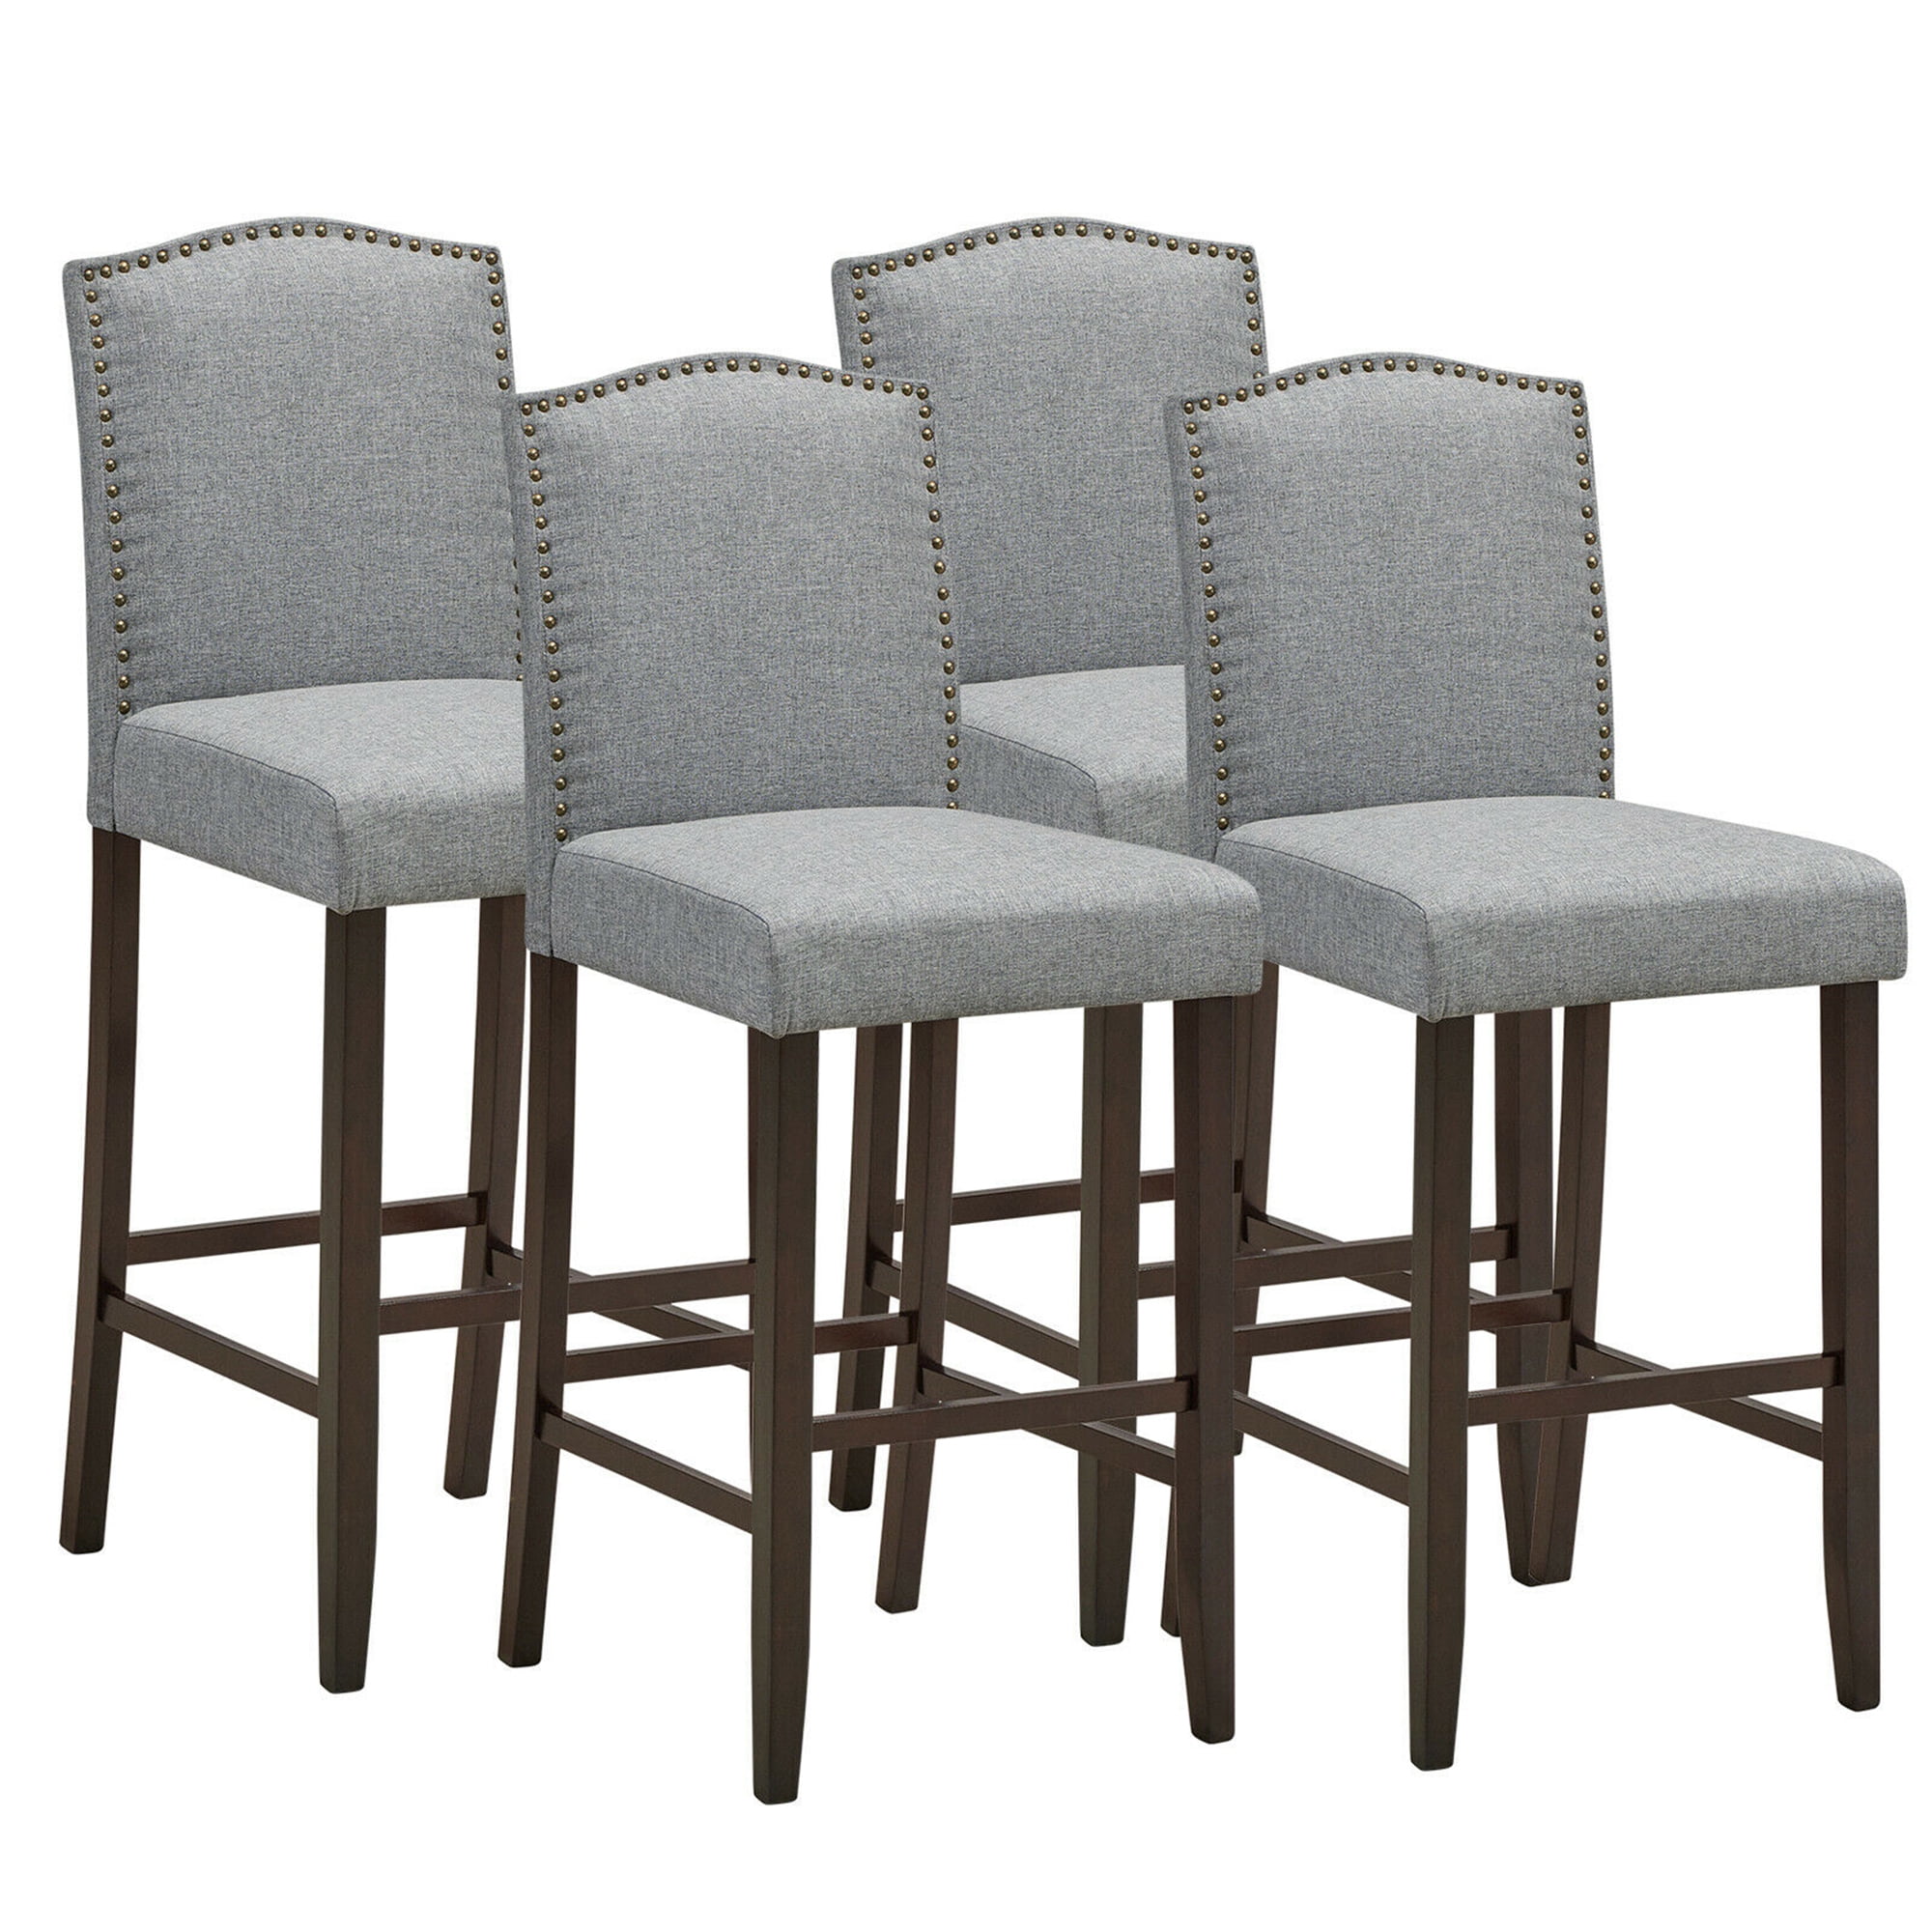 Gymax Set Of 4 Nailhead Bar Stools 29, What Height Chair For 29 Inch Table